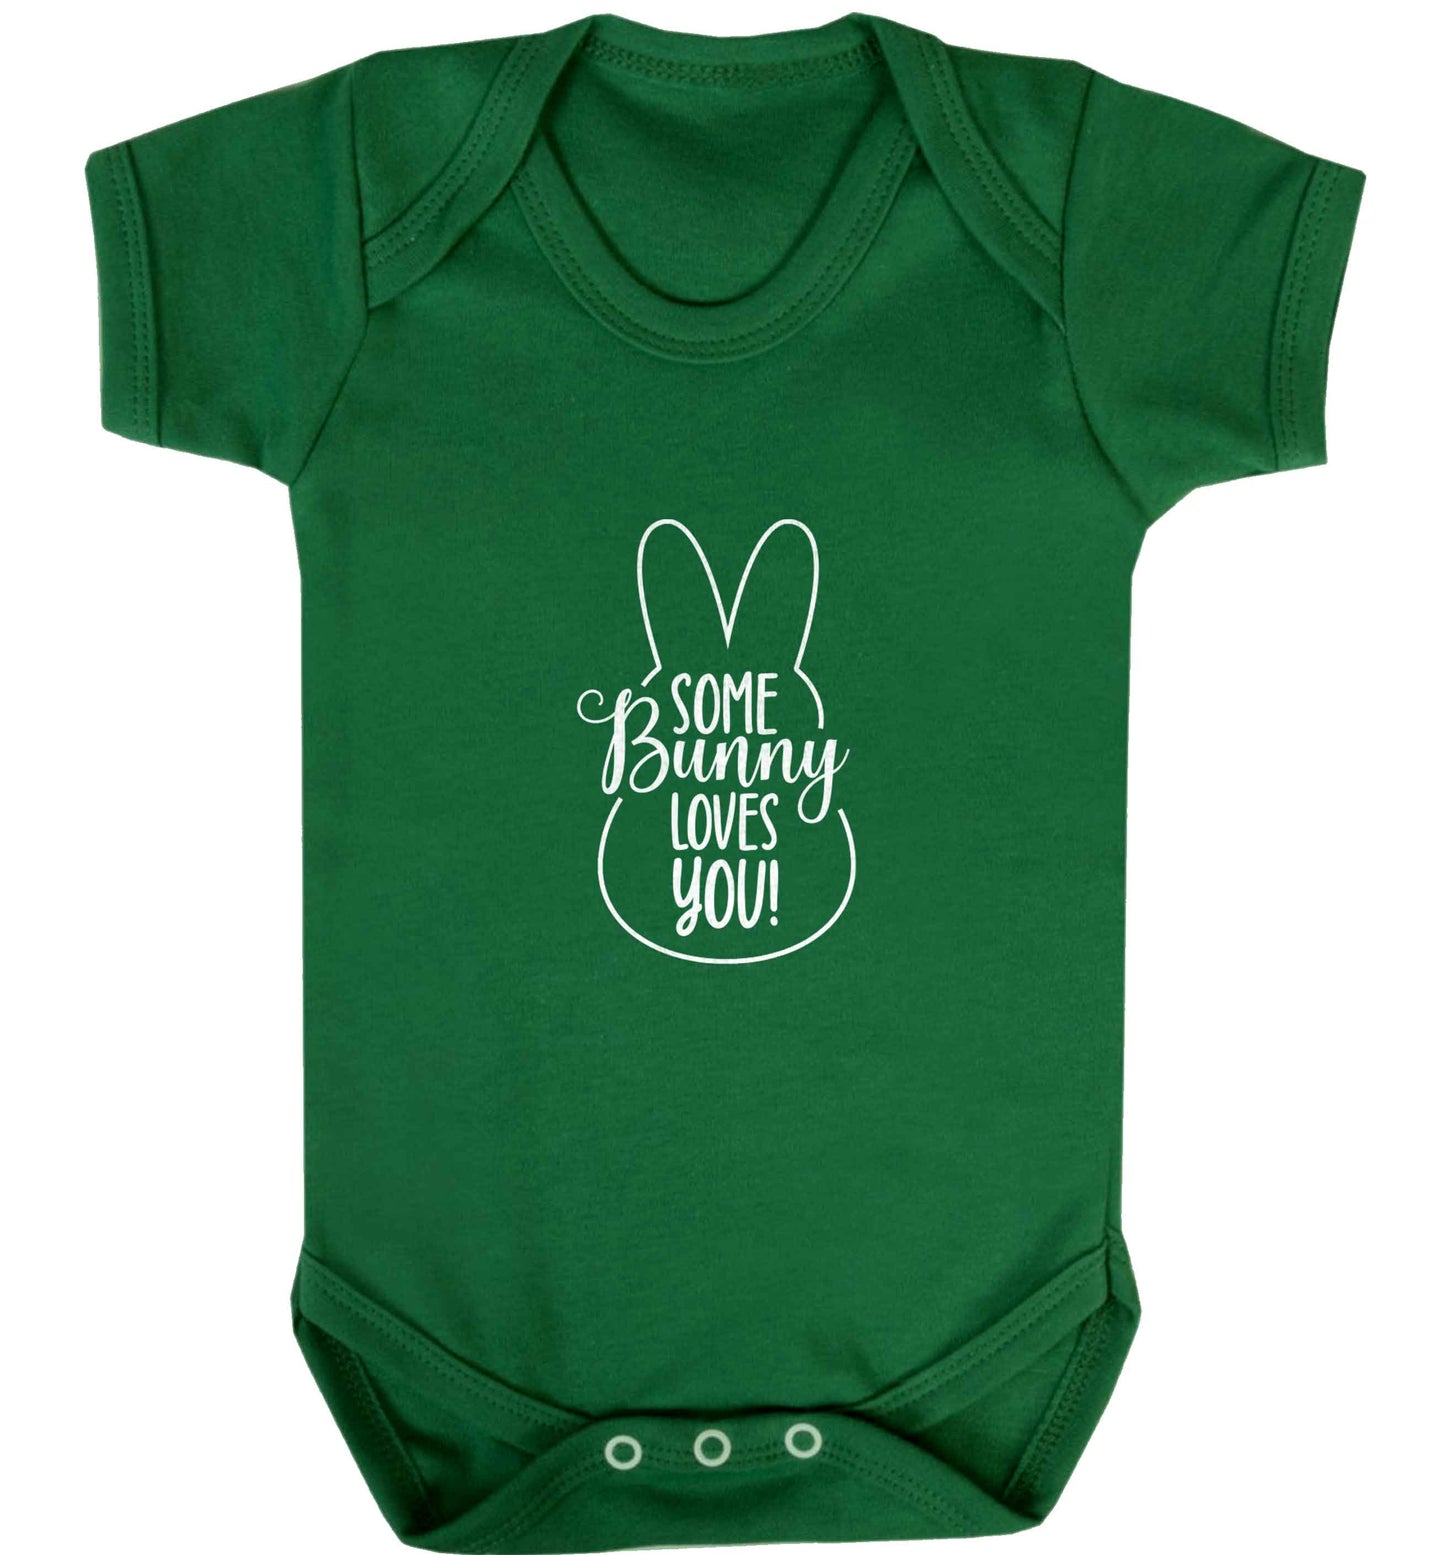 Some bunny loves you baby vest green 18-24 months